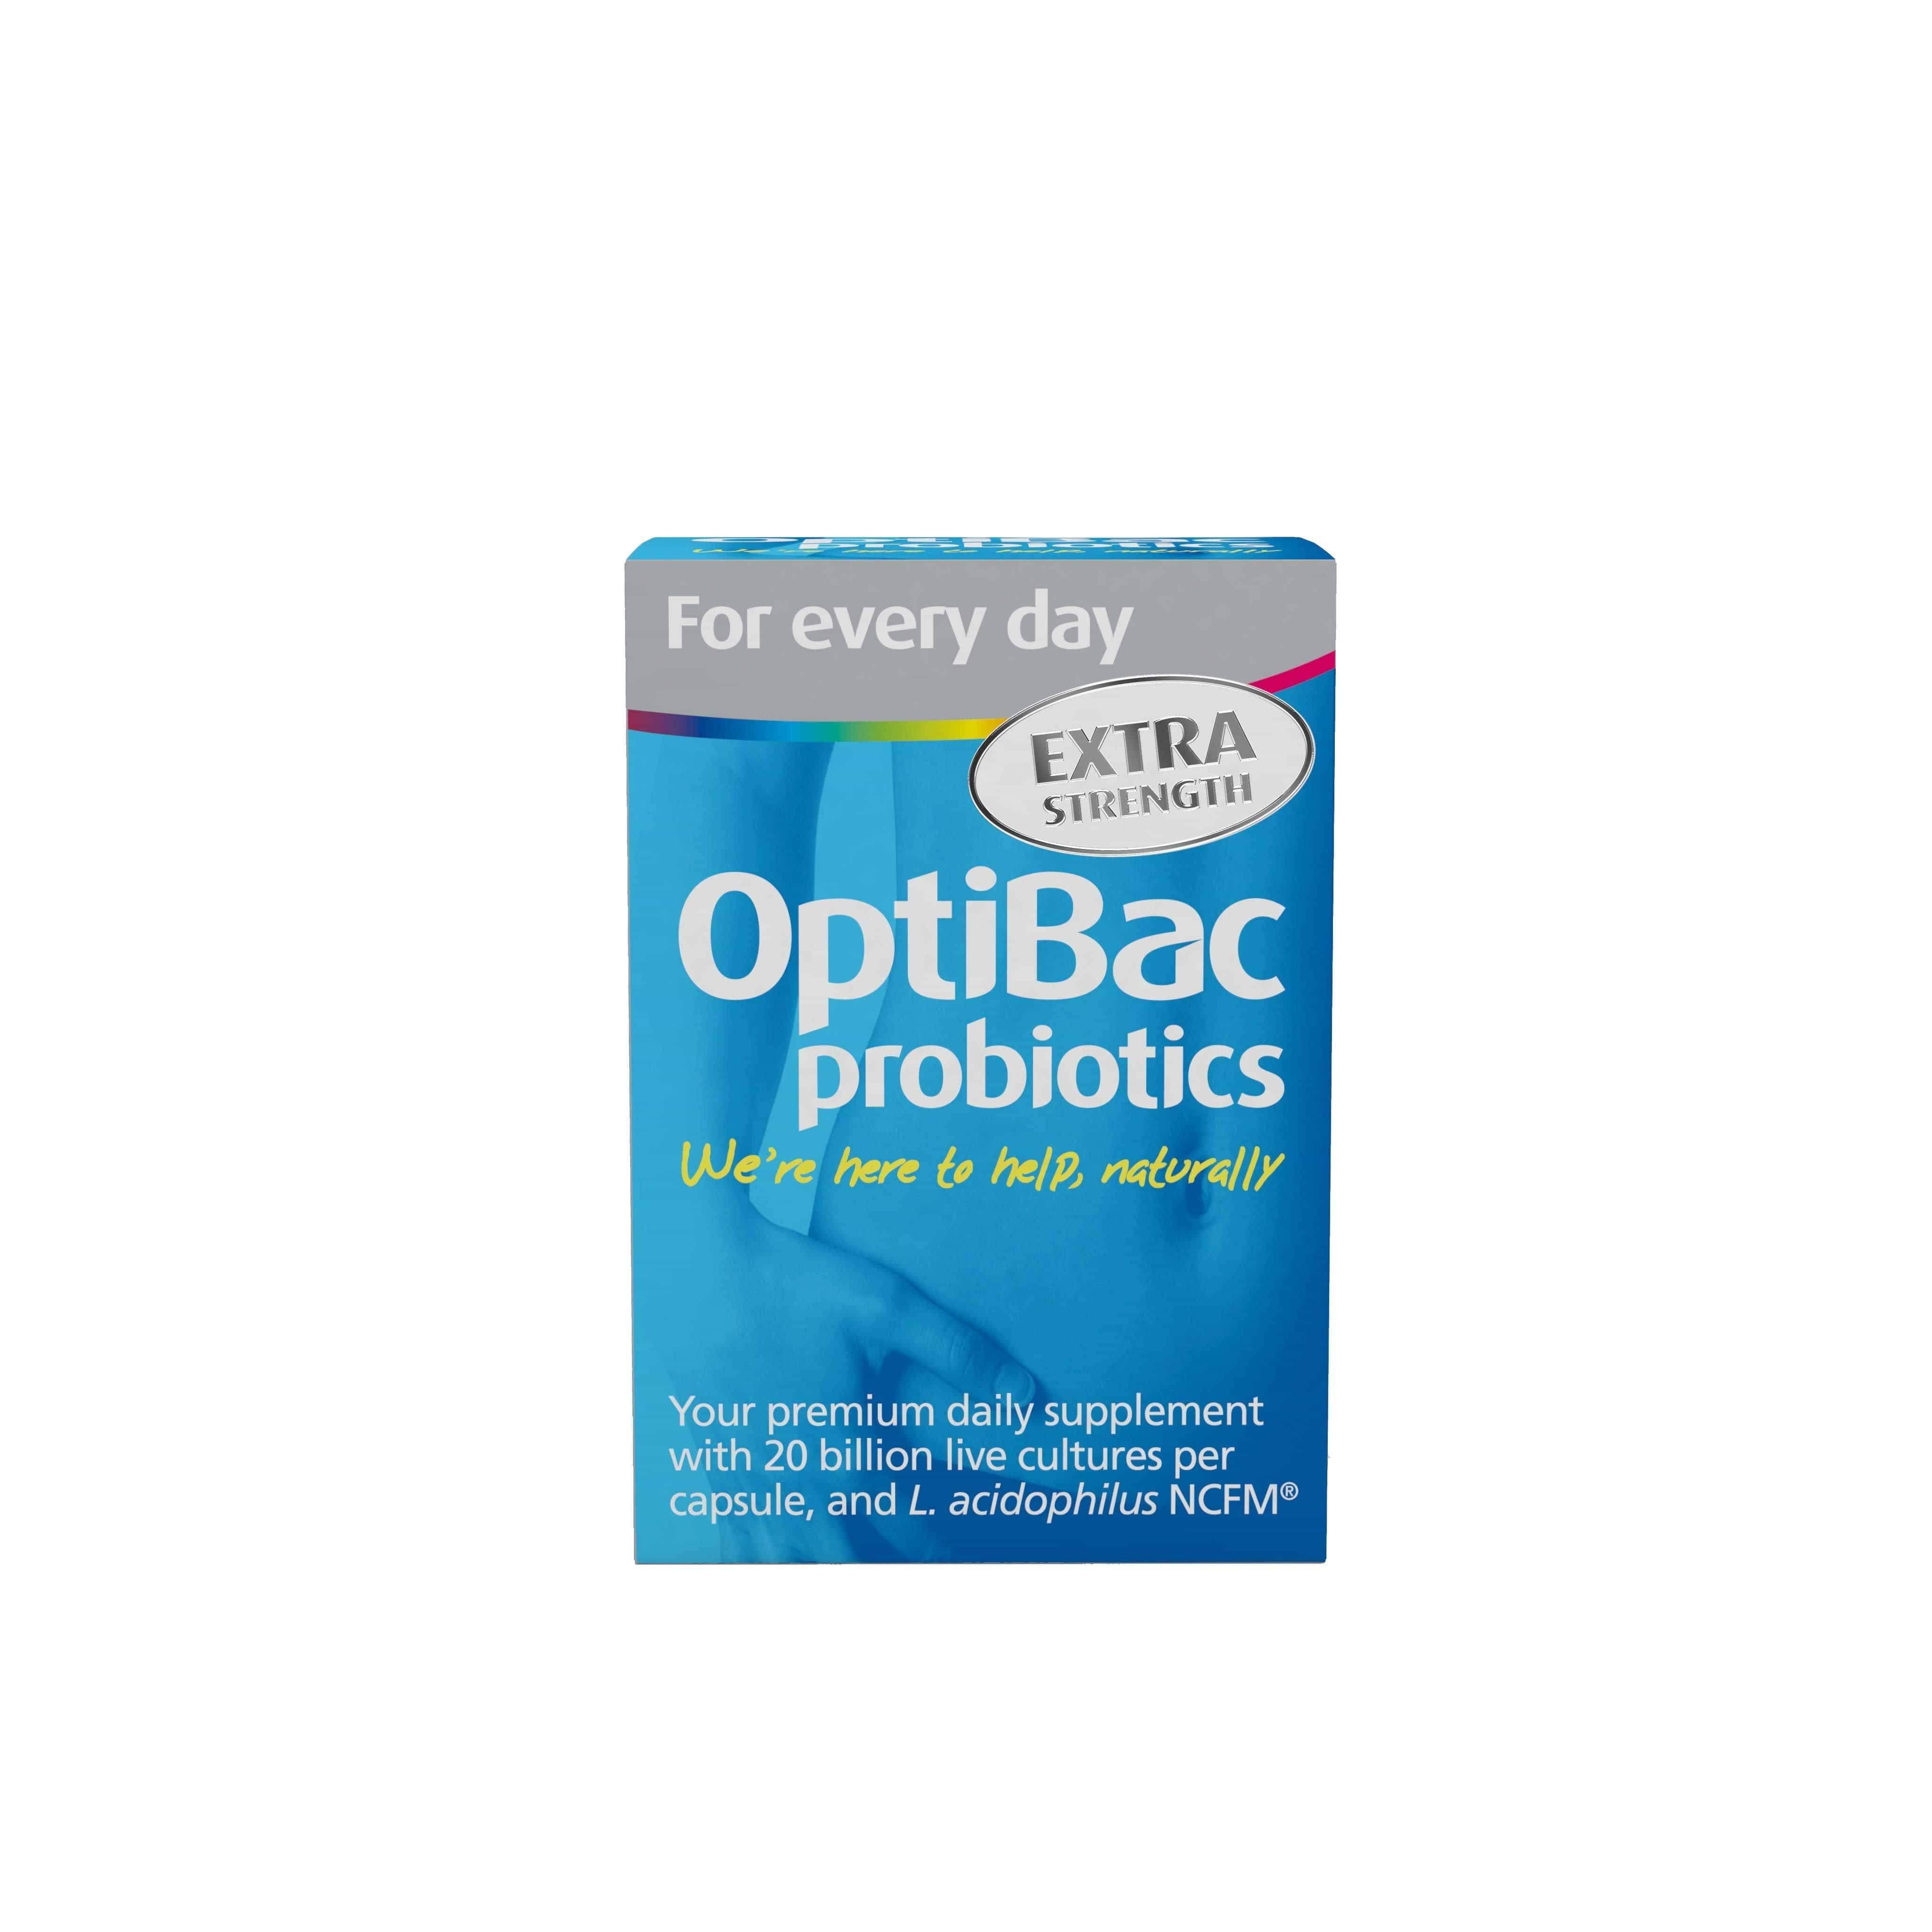 Optibac Probiotics for Daily Wellbeing - 30 Capsules